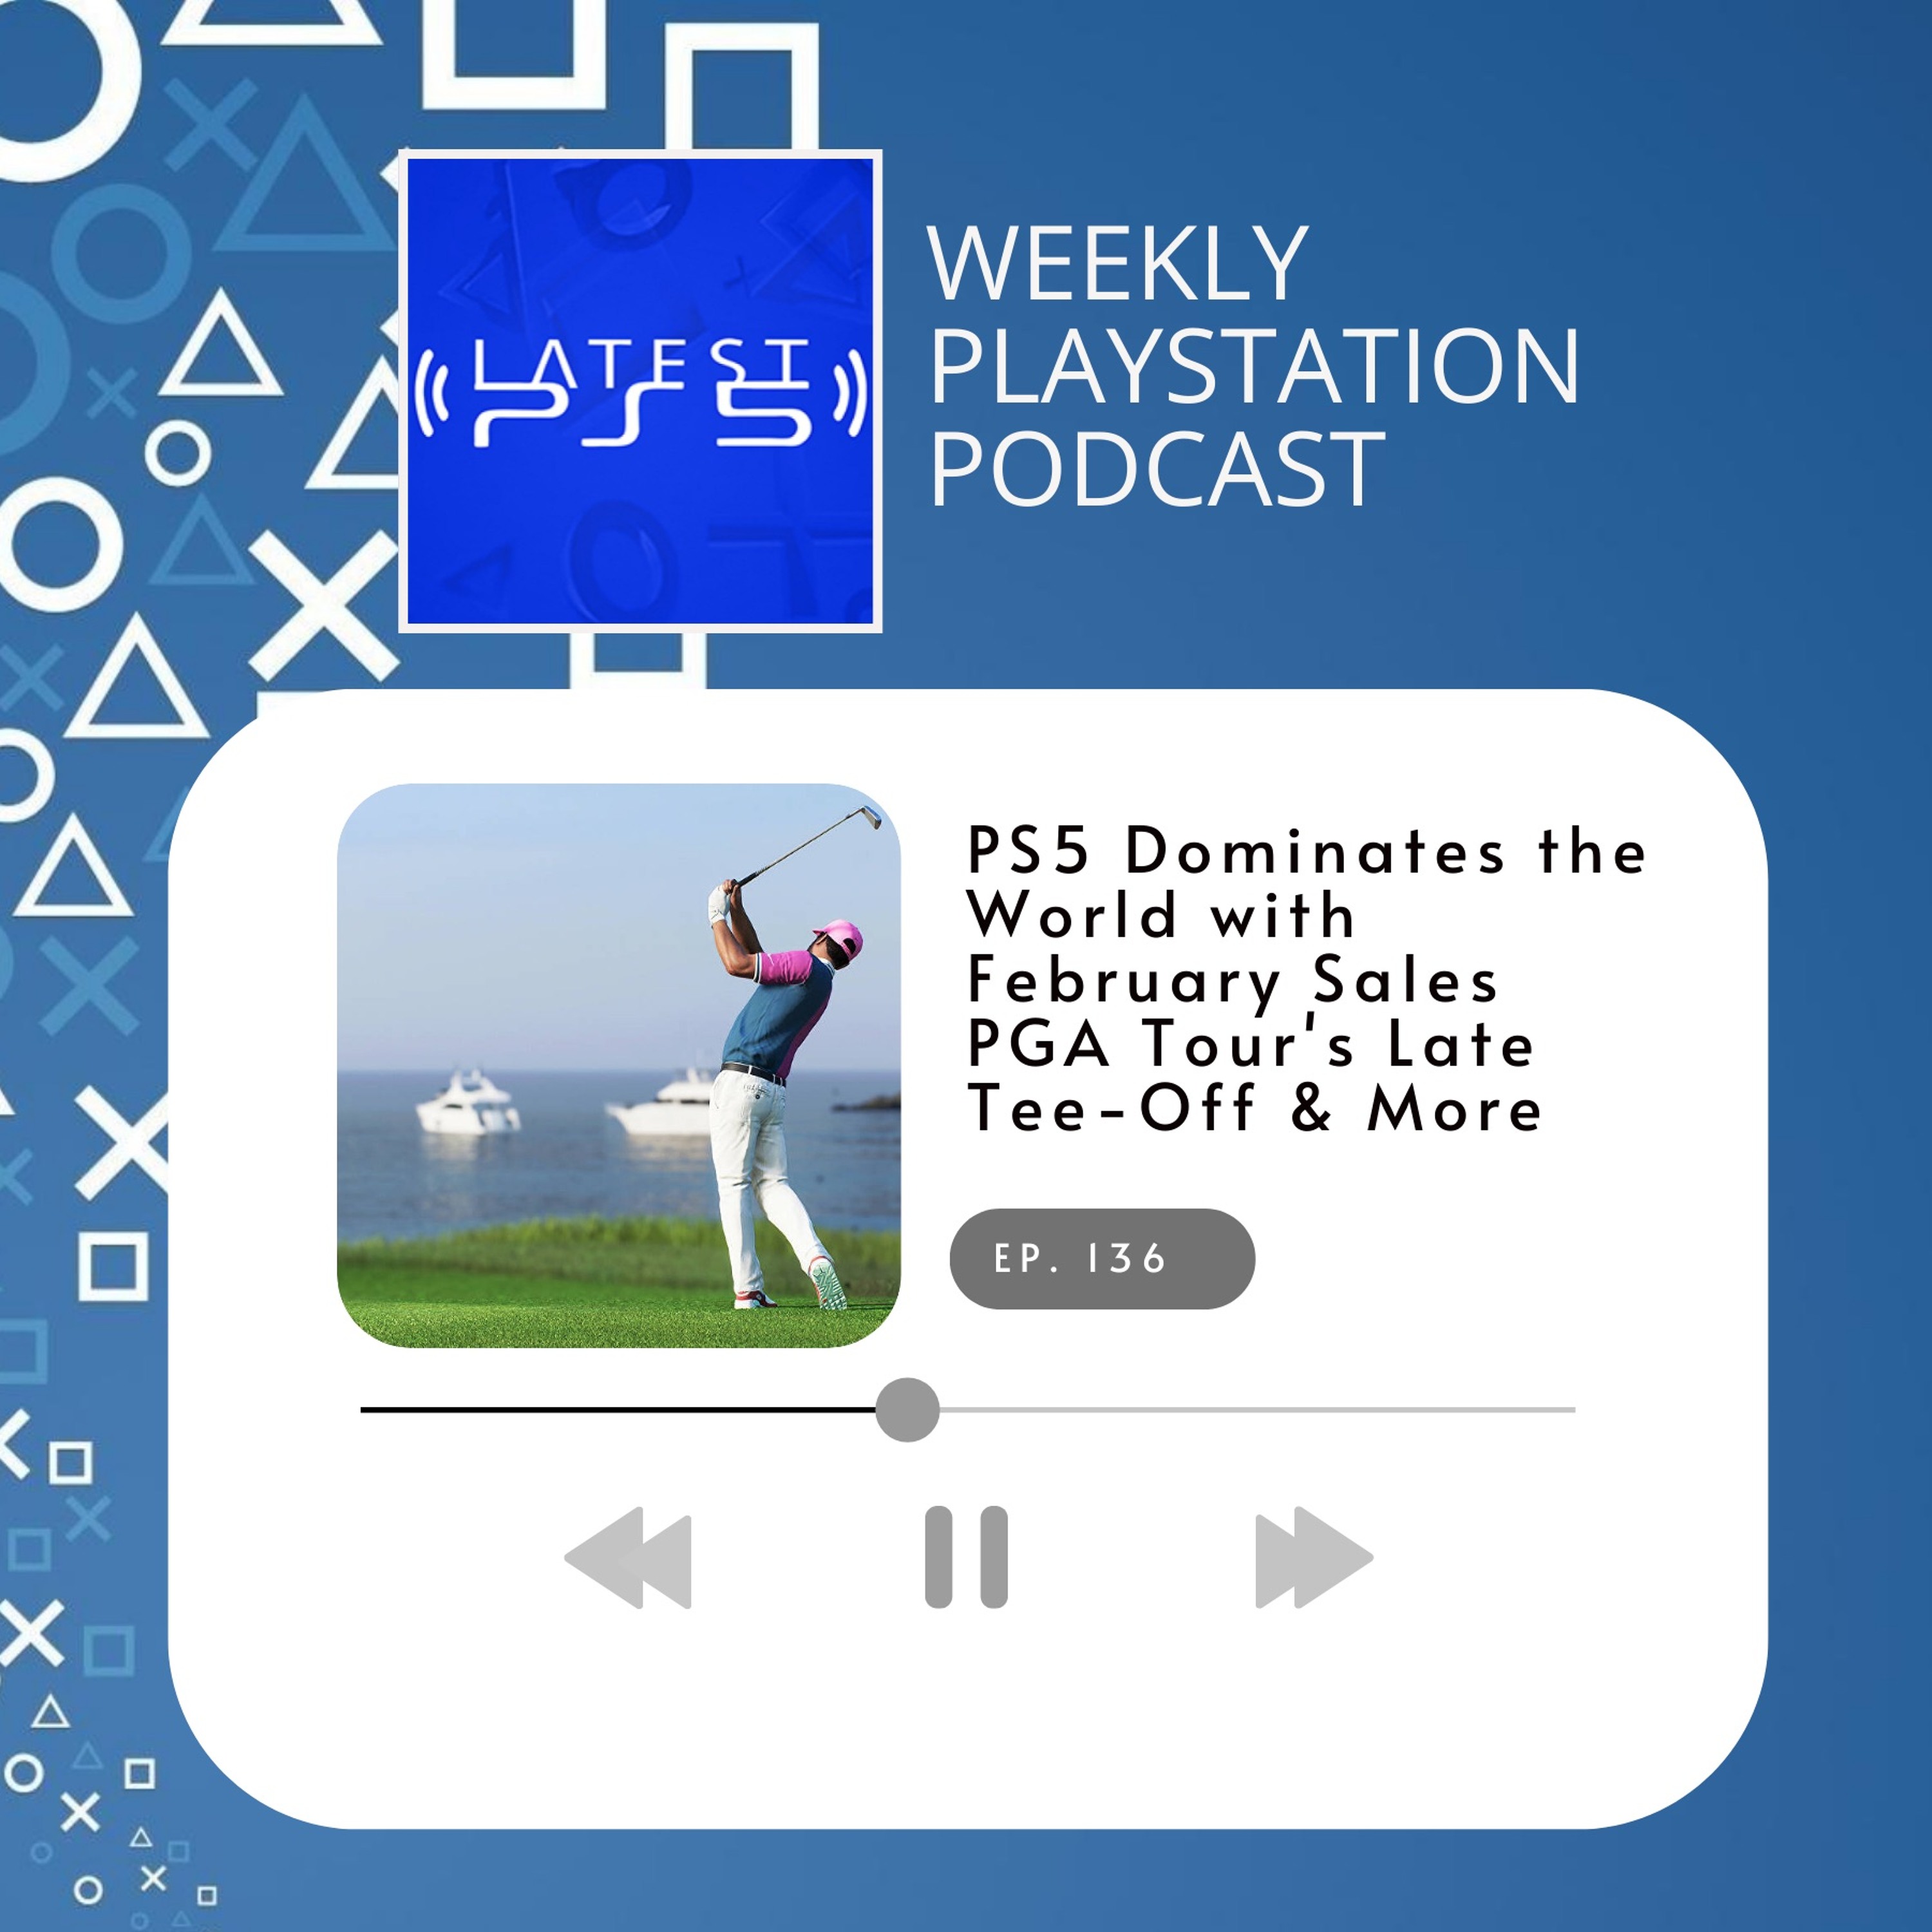 PS5 Dominates the World in February, PGA Tour’s Late Tee-Off & More - Episode 136